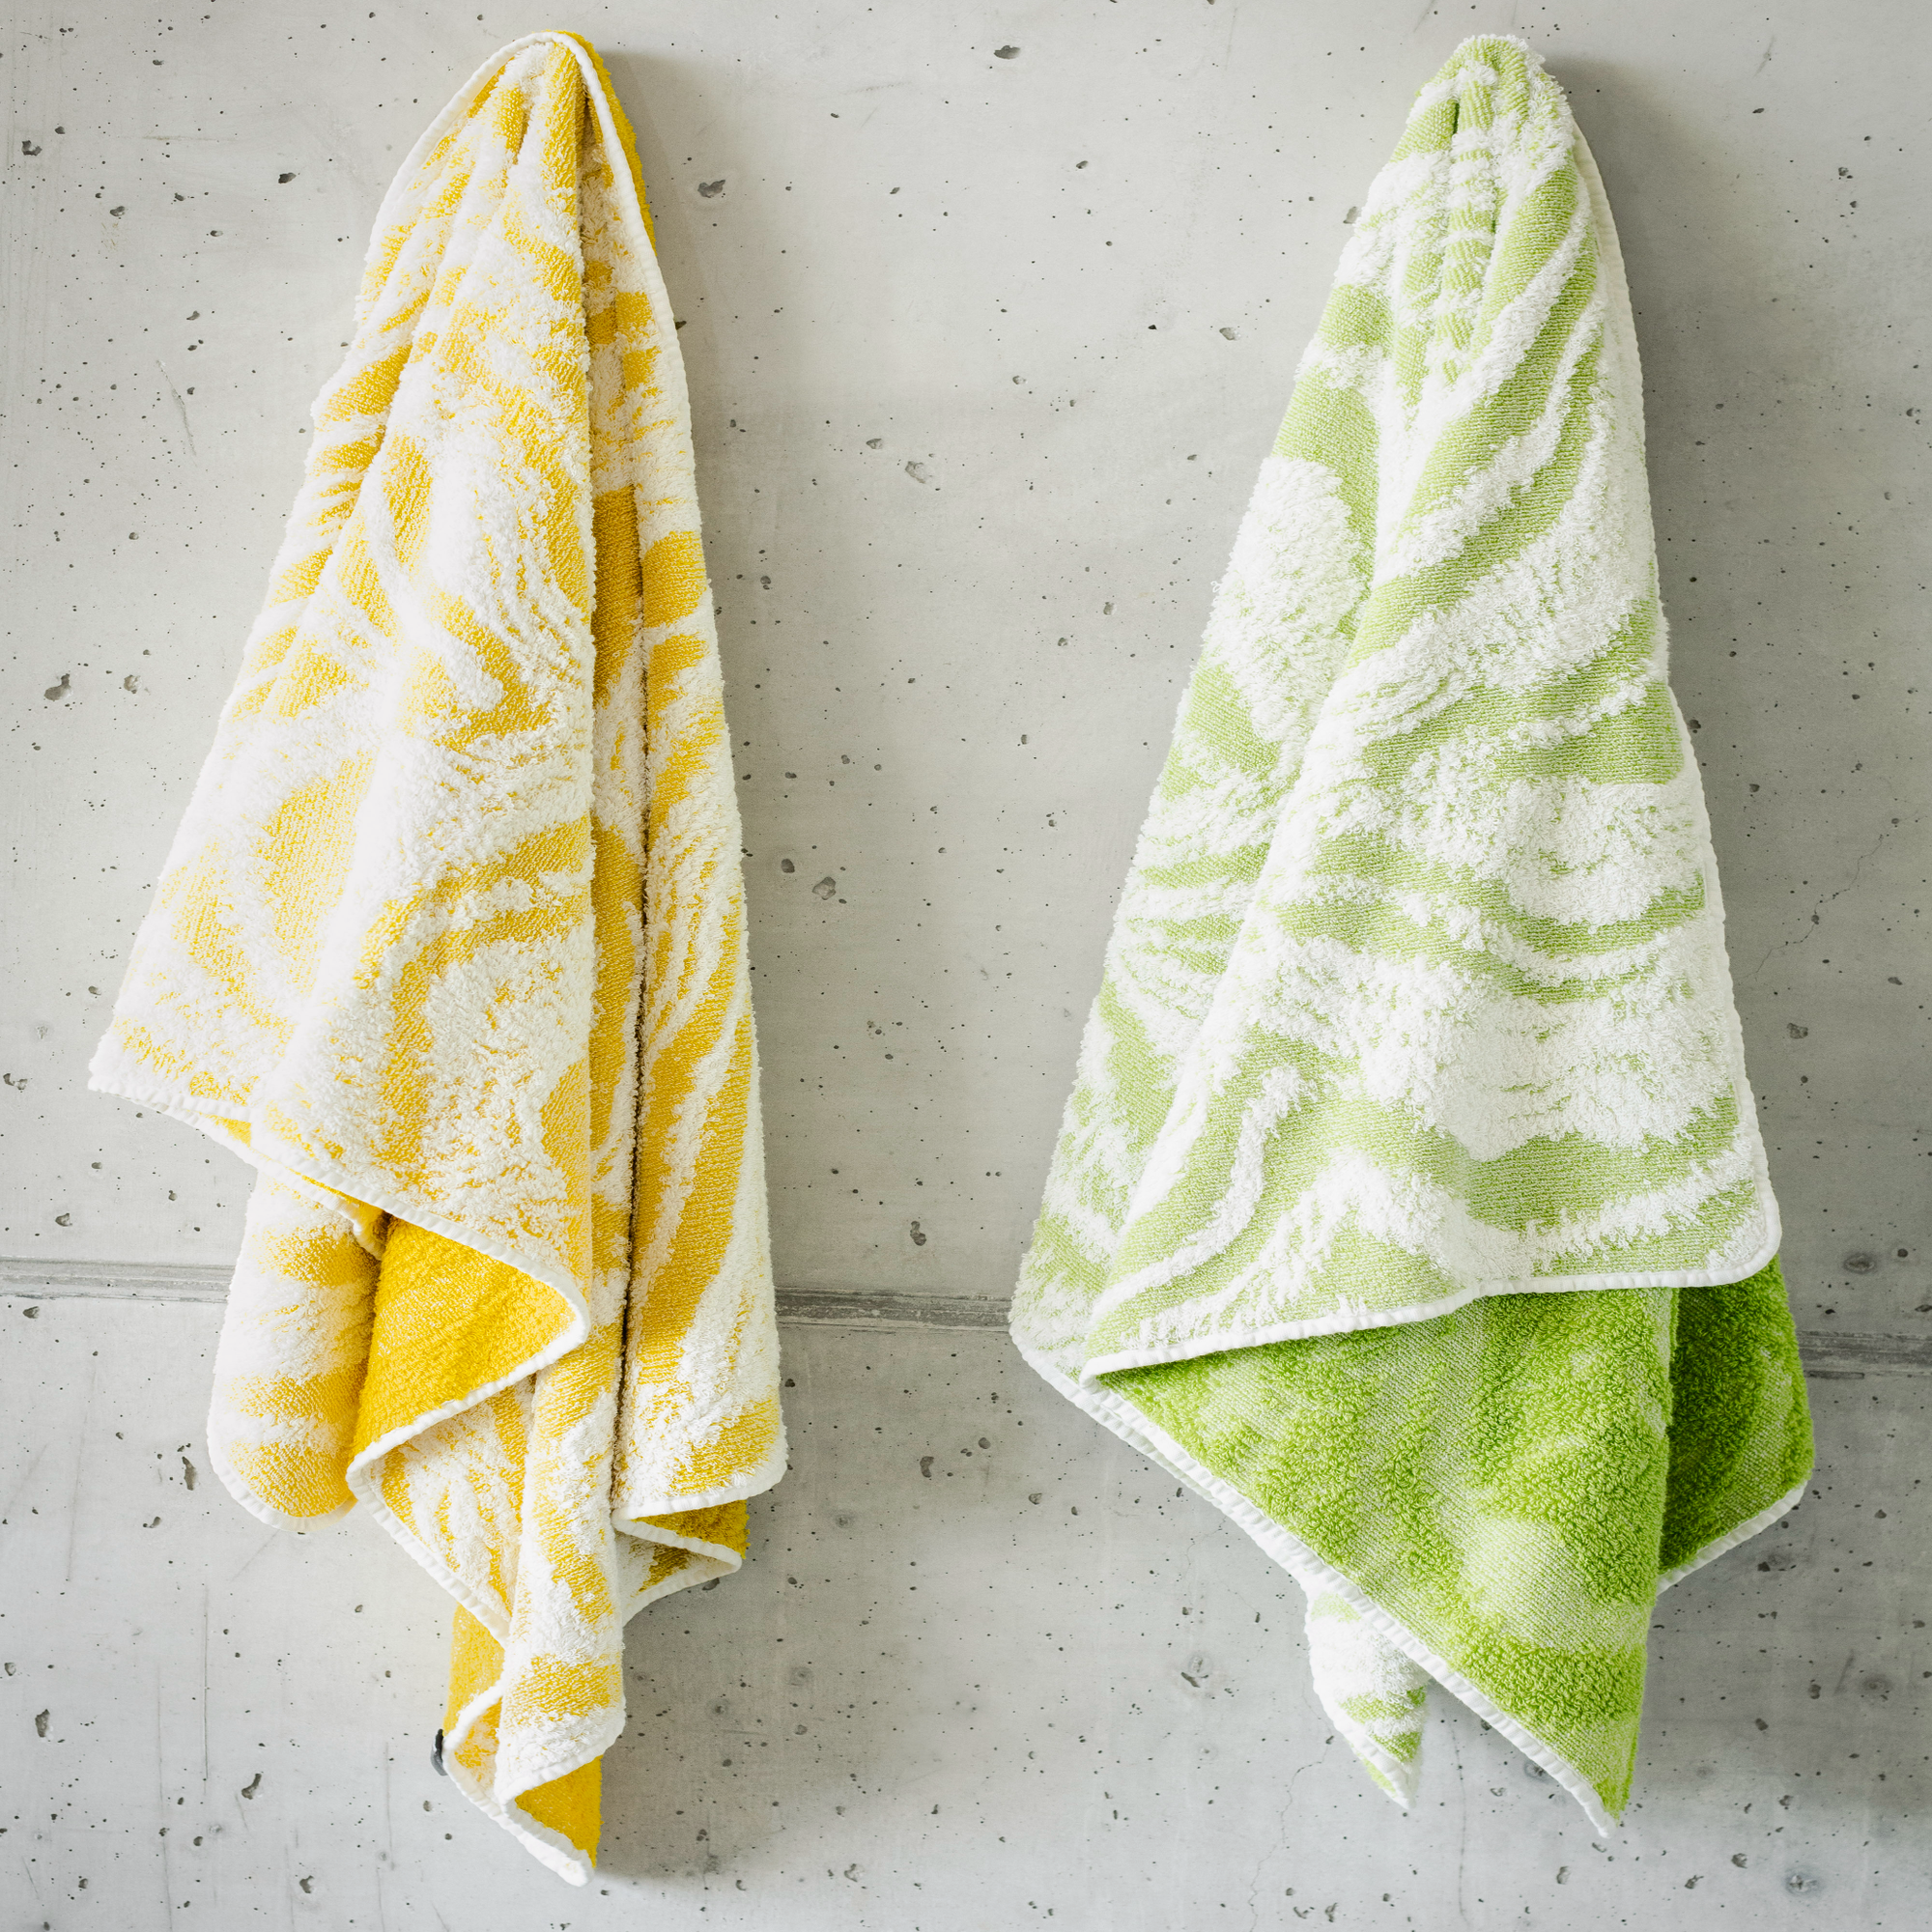 Both Colors of Abyss Fogo Bath Towels Hanging